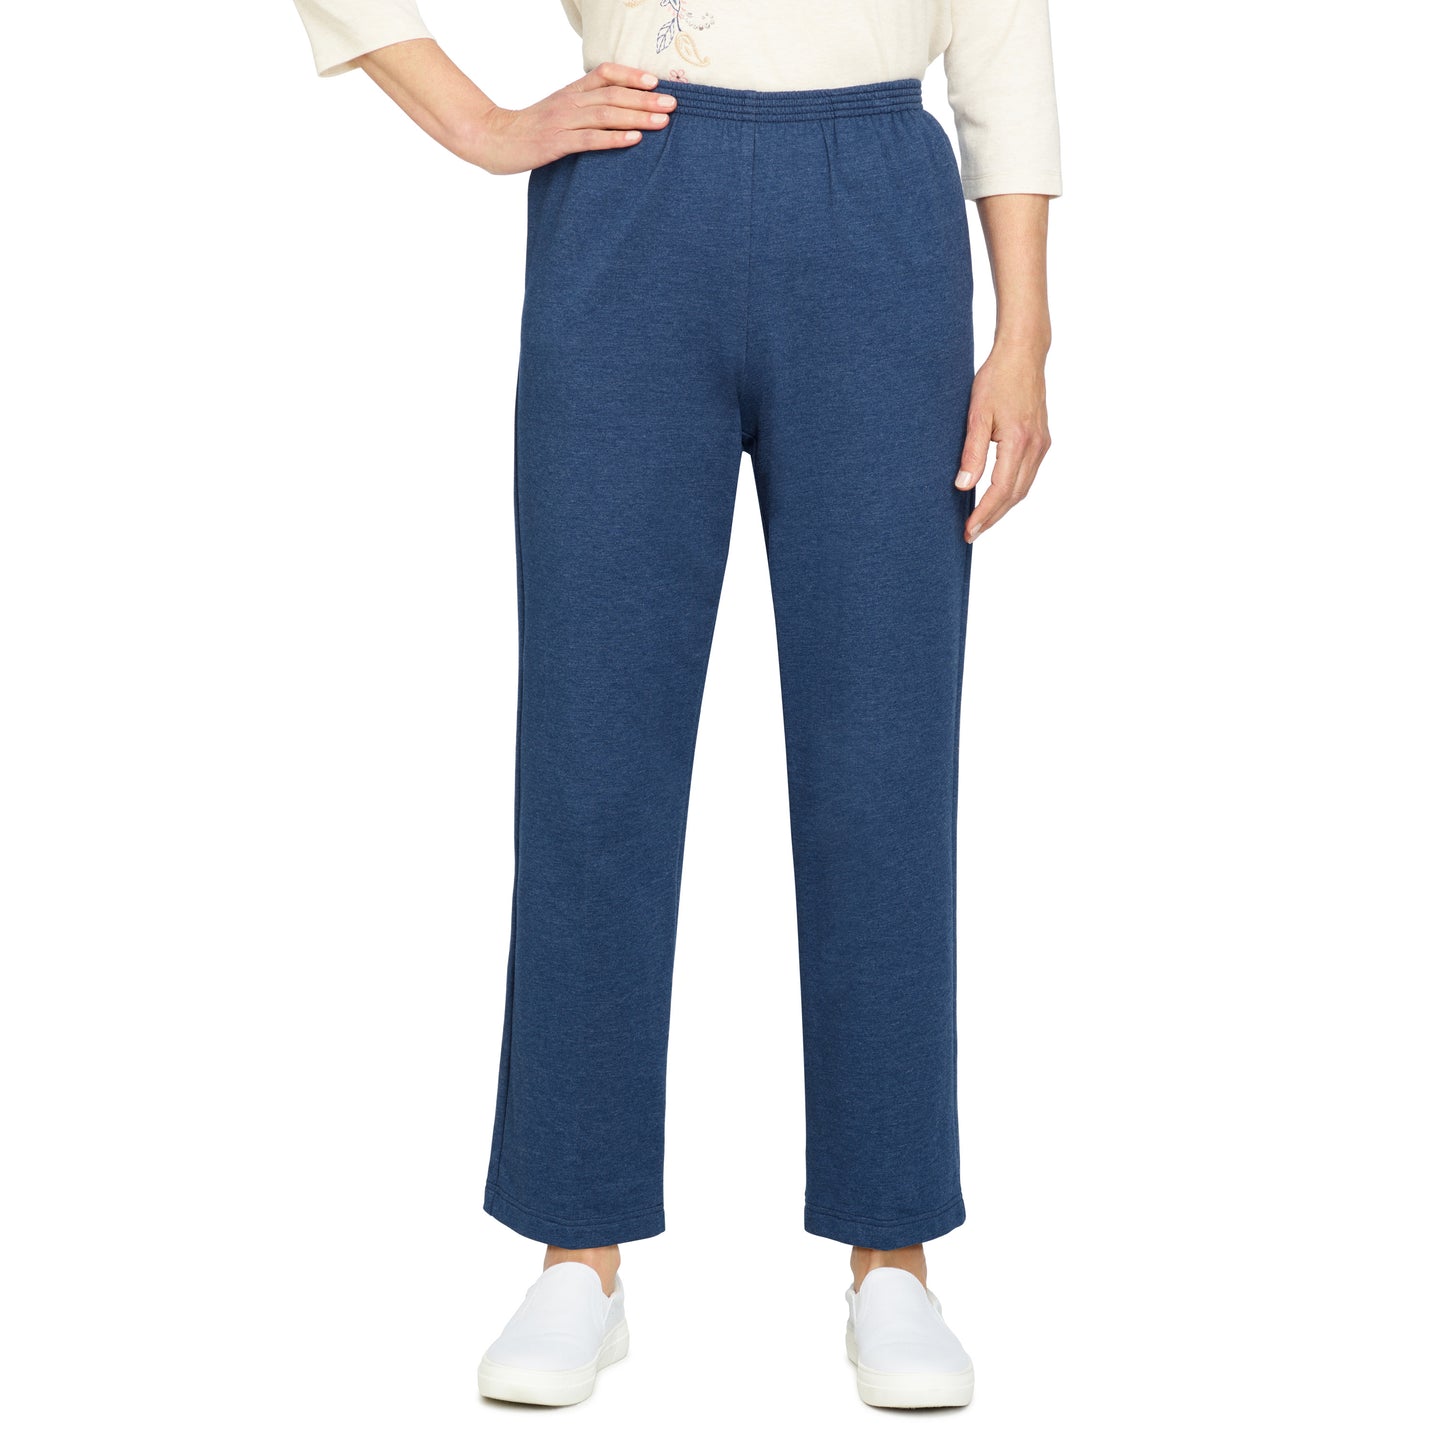 Relax And Enjoy French Terry Pant Medium Length Petite